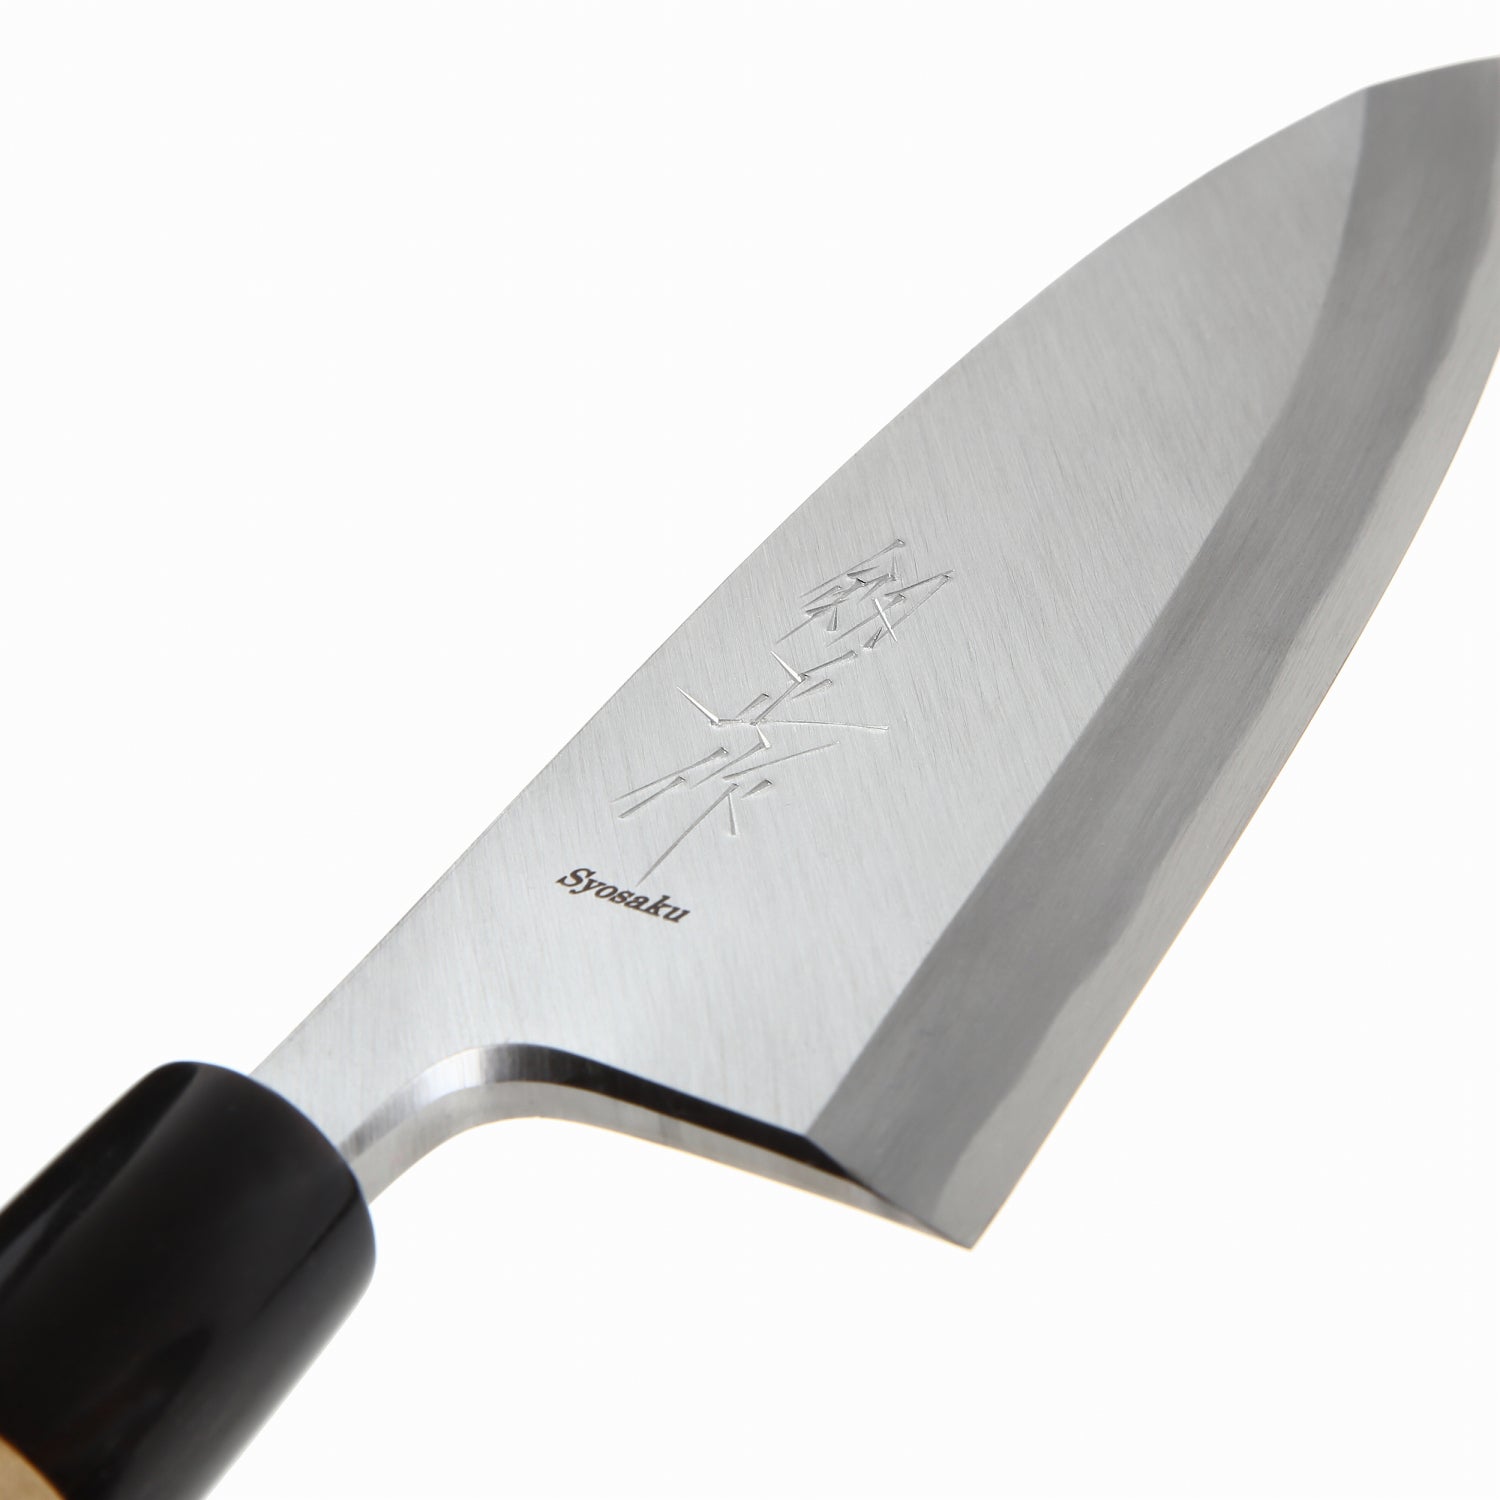 60-Second Skill: Filleting a fish with a Japanese deba knife